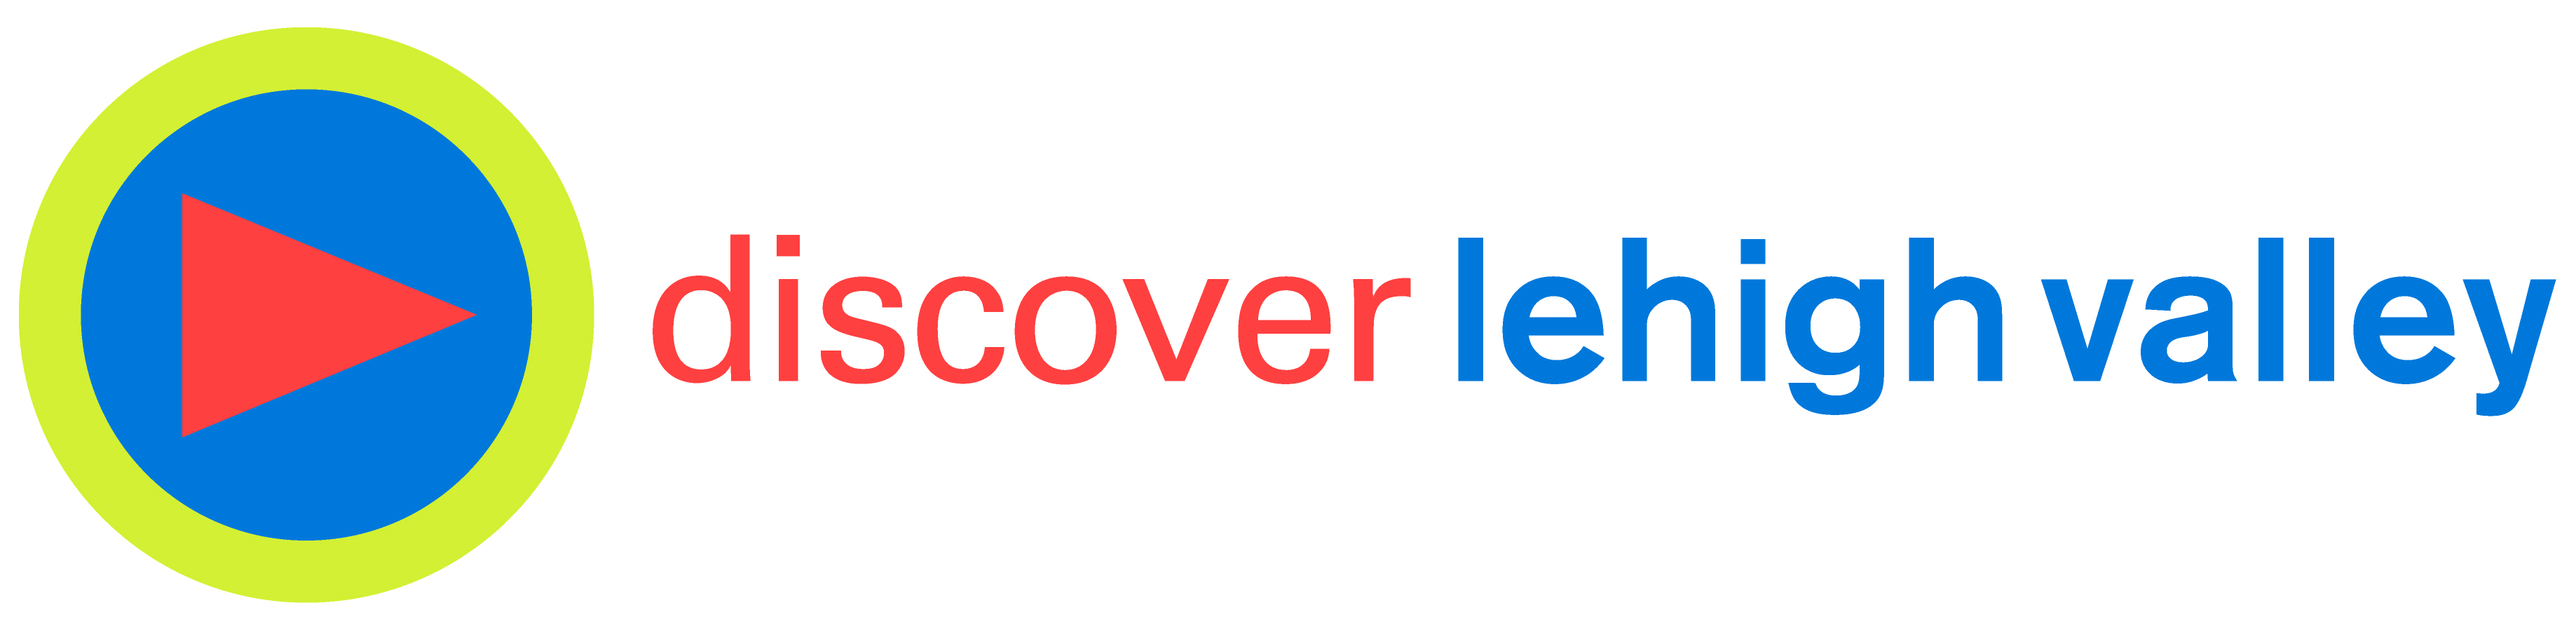 'Discover Lehigh Valley' is New Identity for Lehigh Valley Convention